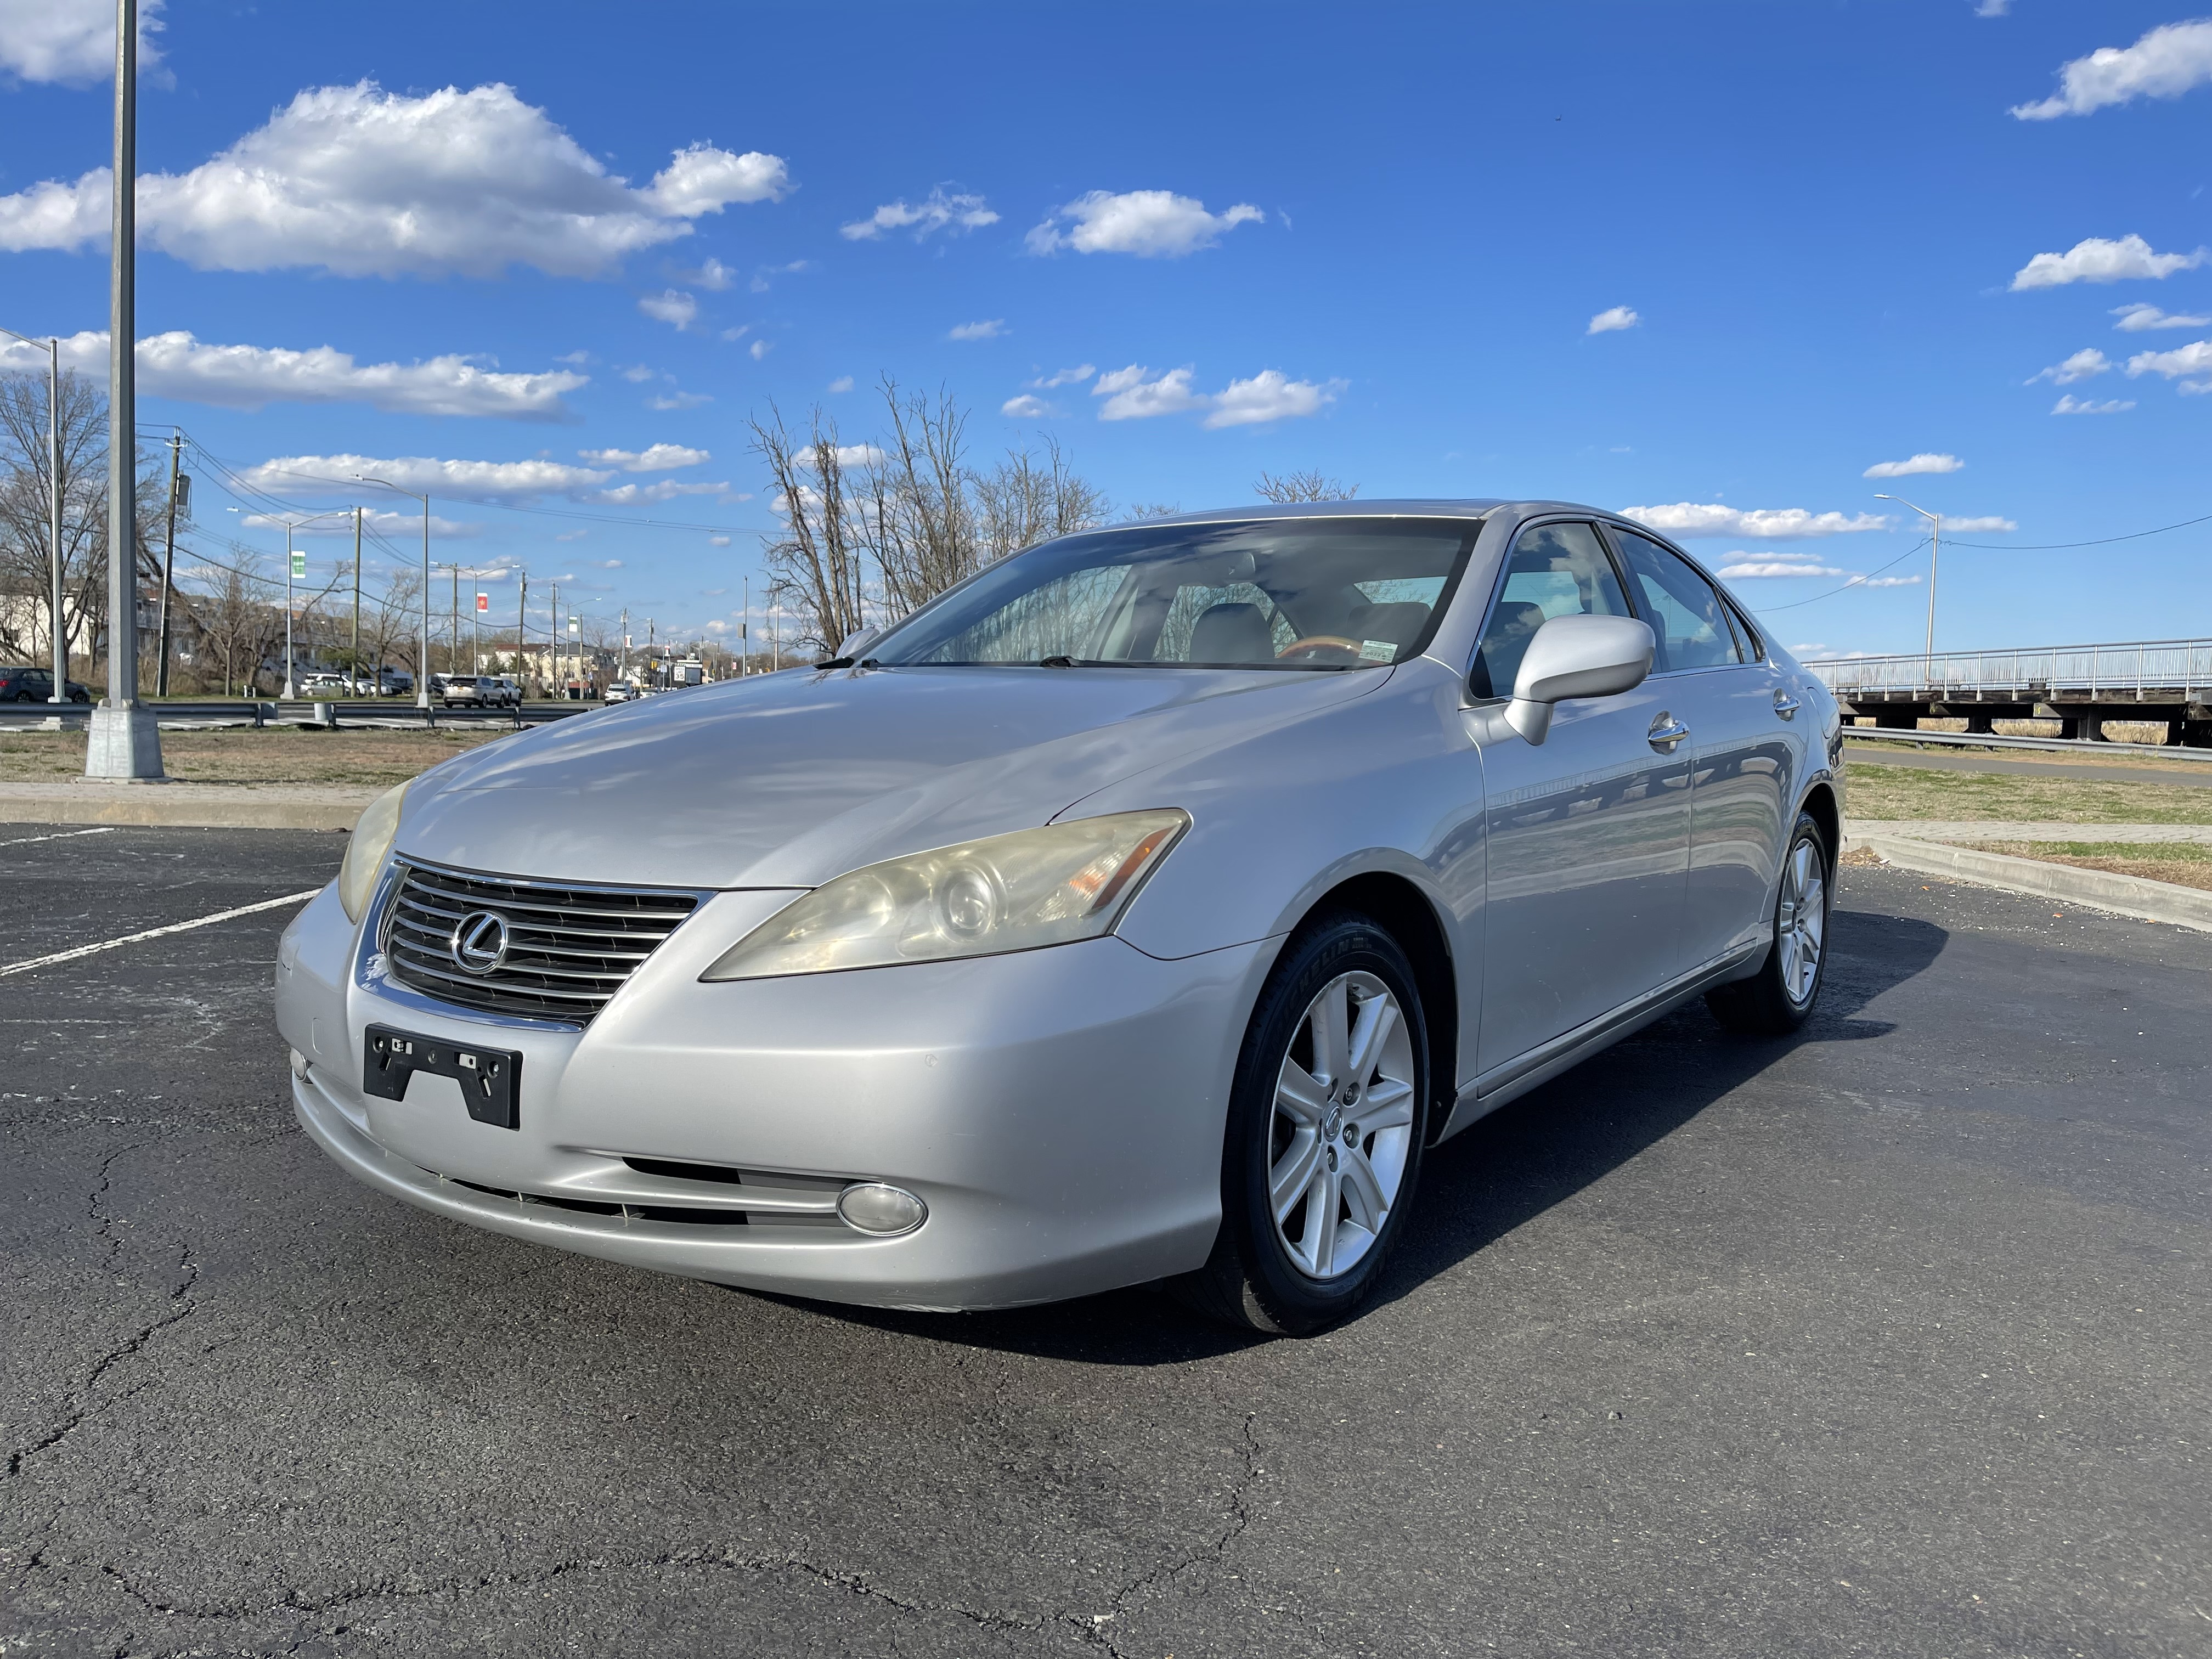 Used Car - 2007 Lexus ES 350 for Sale in Staten Island, NY